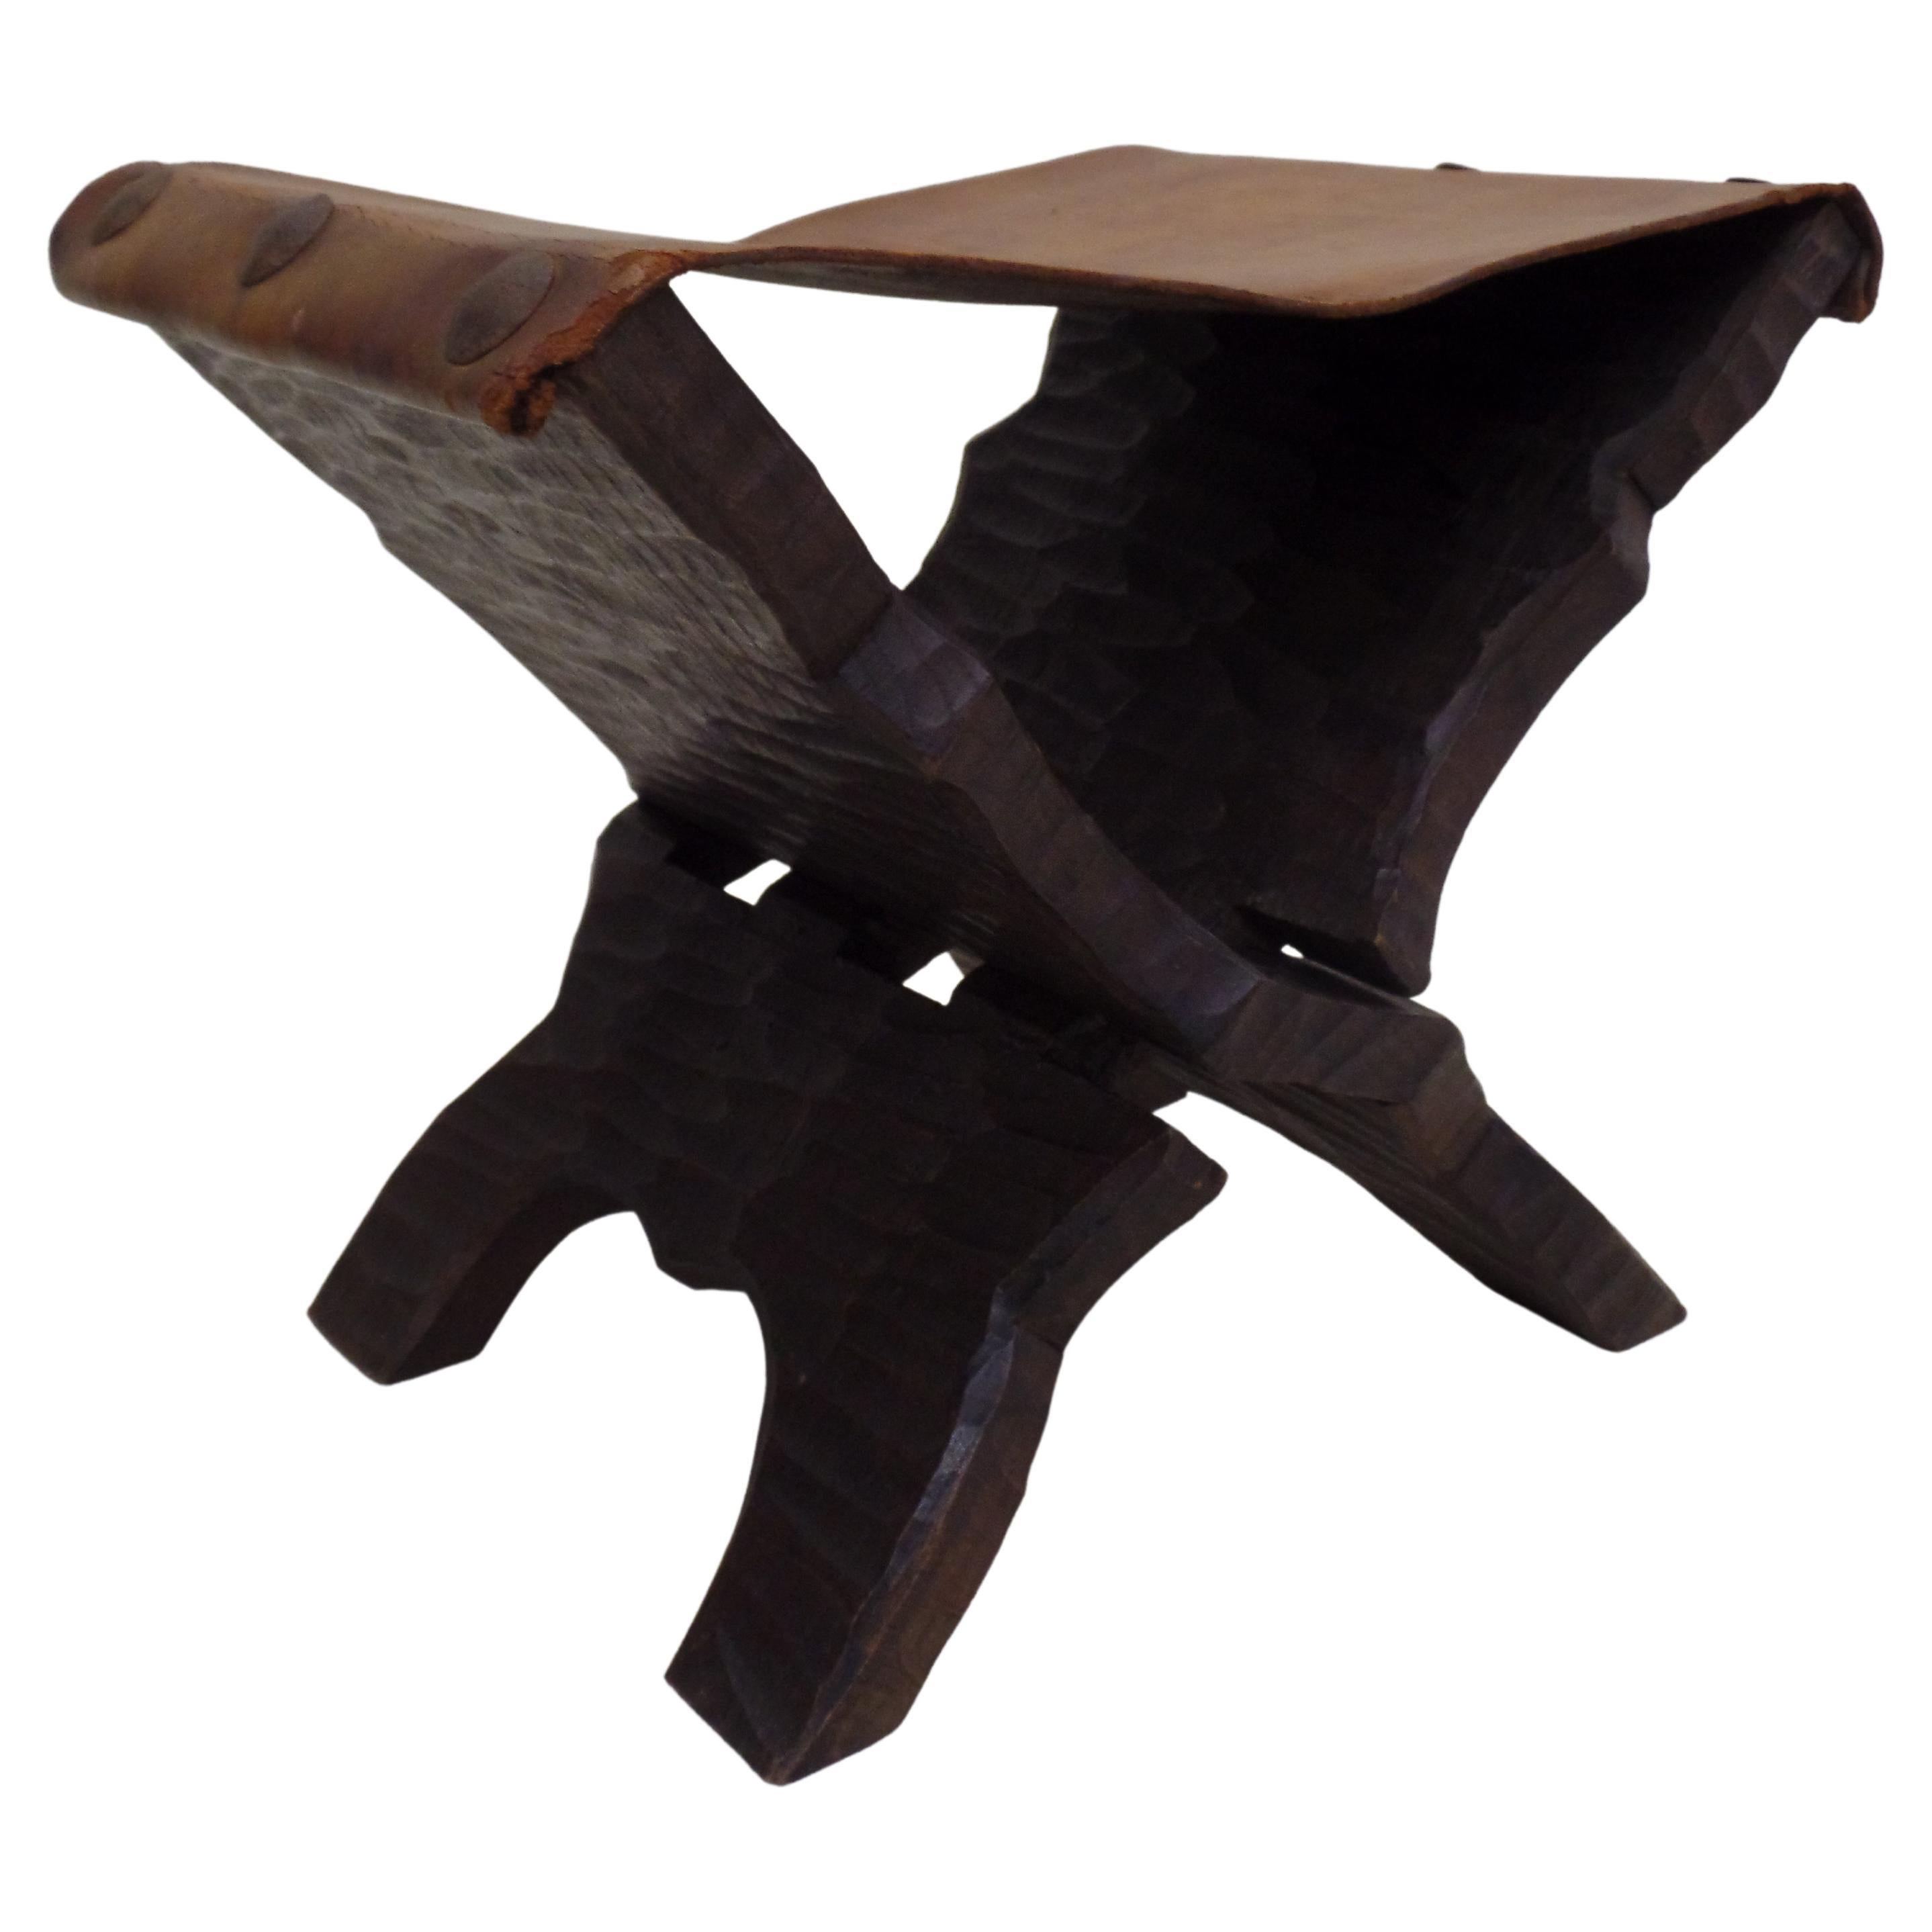 Unique pair of French mid-century hand-carved stools or benches in the style of Jean Michel Frank. 

The pieces feature dramatic hand chiseled wood with natural deep channeling that shows the rough character of the wood. The structure forms a X with